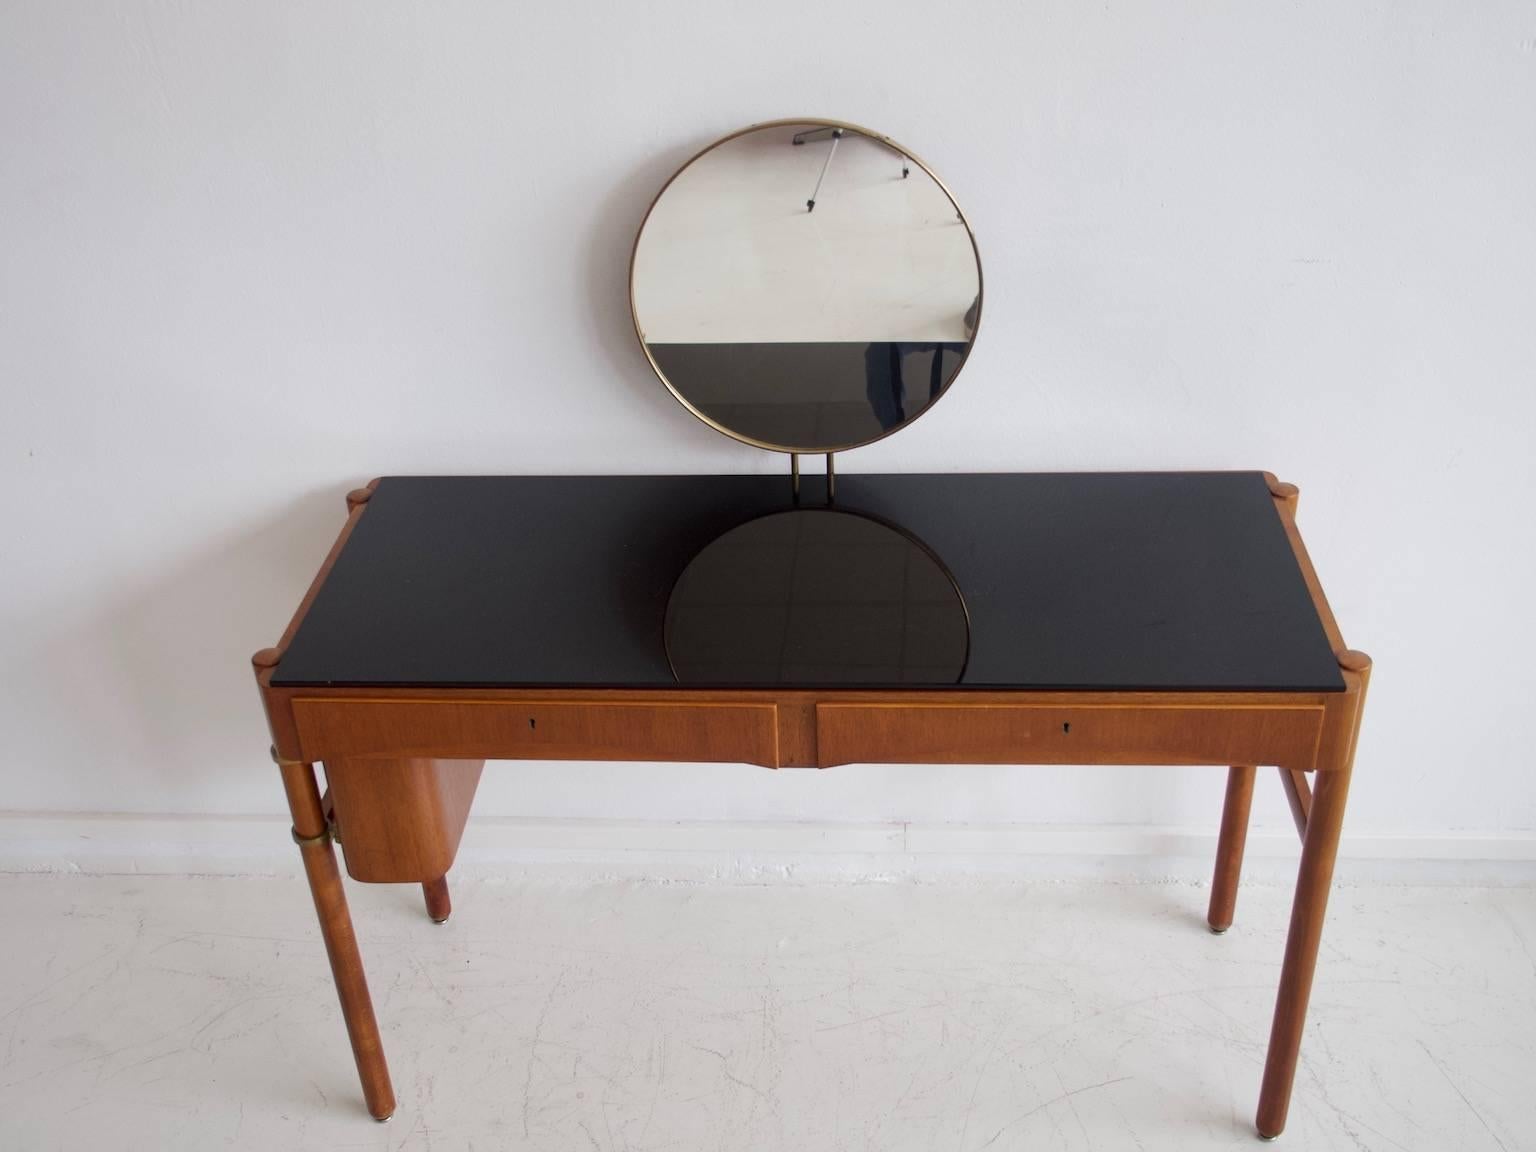 Teak vanity with a round mirror and dark mirrored glass tabletop. Designed by Bertil Fridhagen and manufactured by Bodafors, Sweden, in 1957. Two drawers with beech interior and a movable compartment for smaller items underneath. Key included.